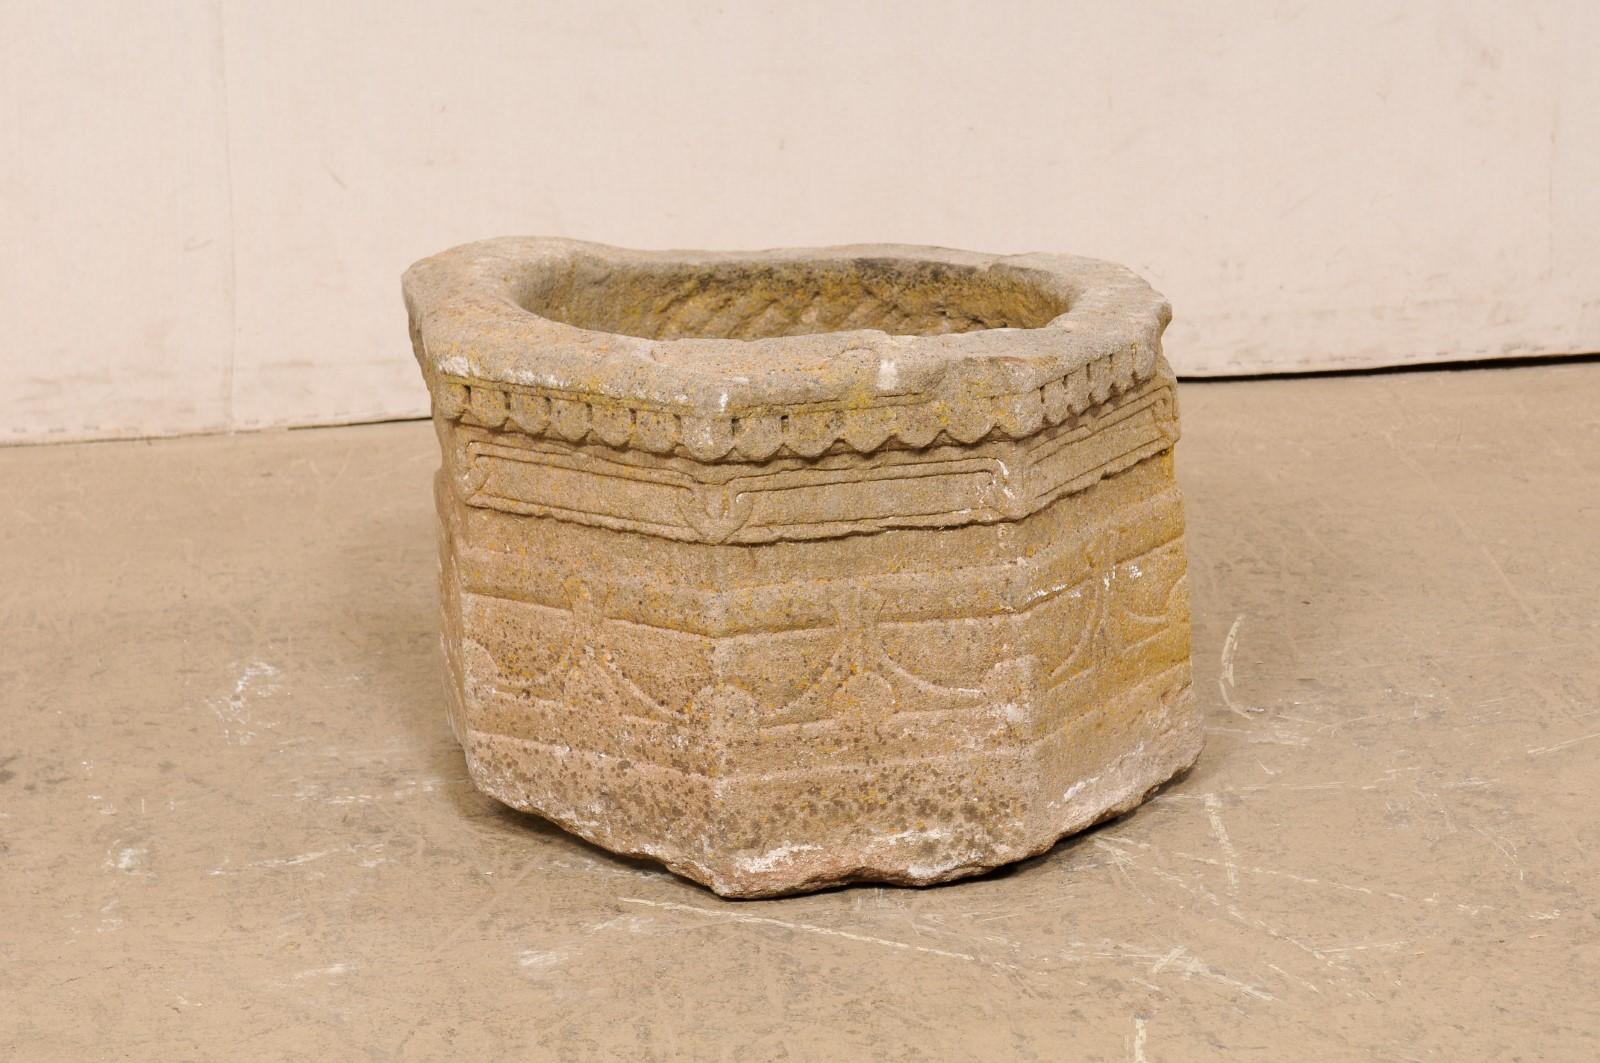 A Spanish hand-carved stone wellhead (would make a great planter!) from the 18th century. This antique well cover from Spain has been hand-carved of stone, mostly circular in shape, with various decorative patterning etched throughout its exterior.